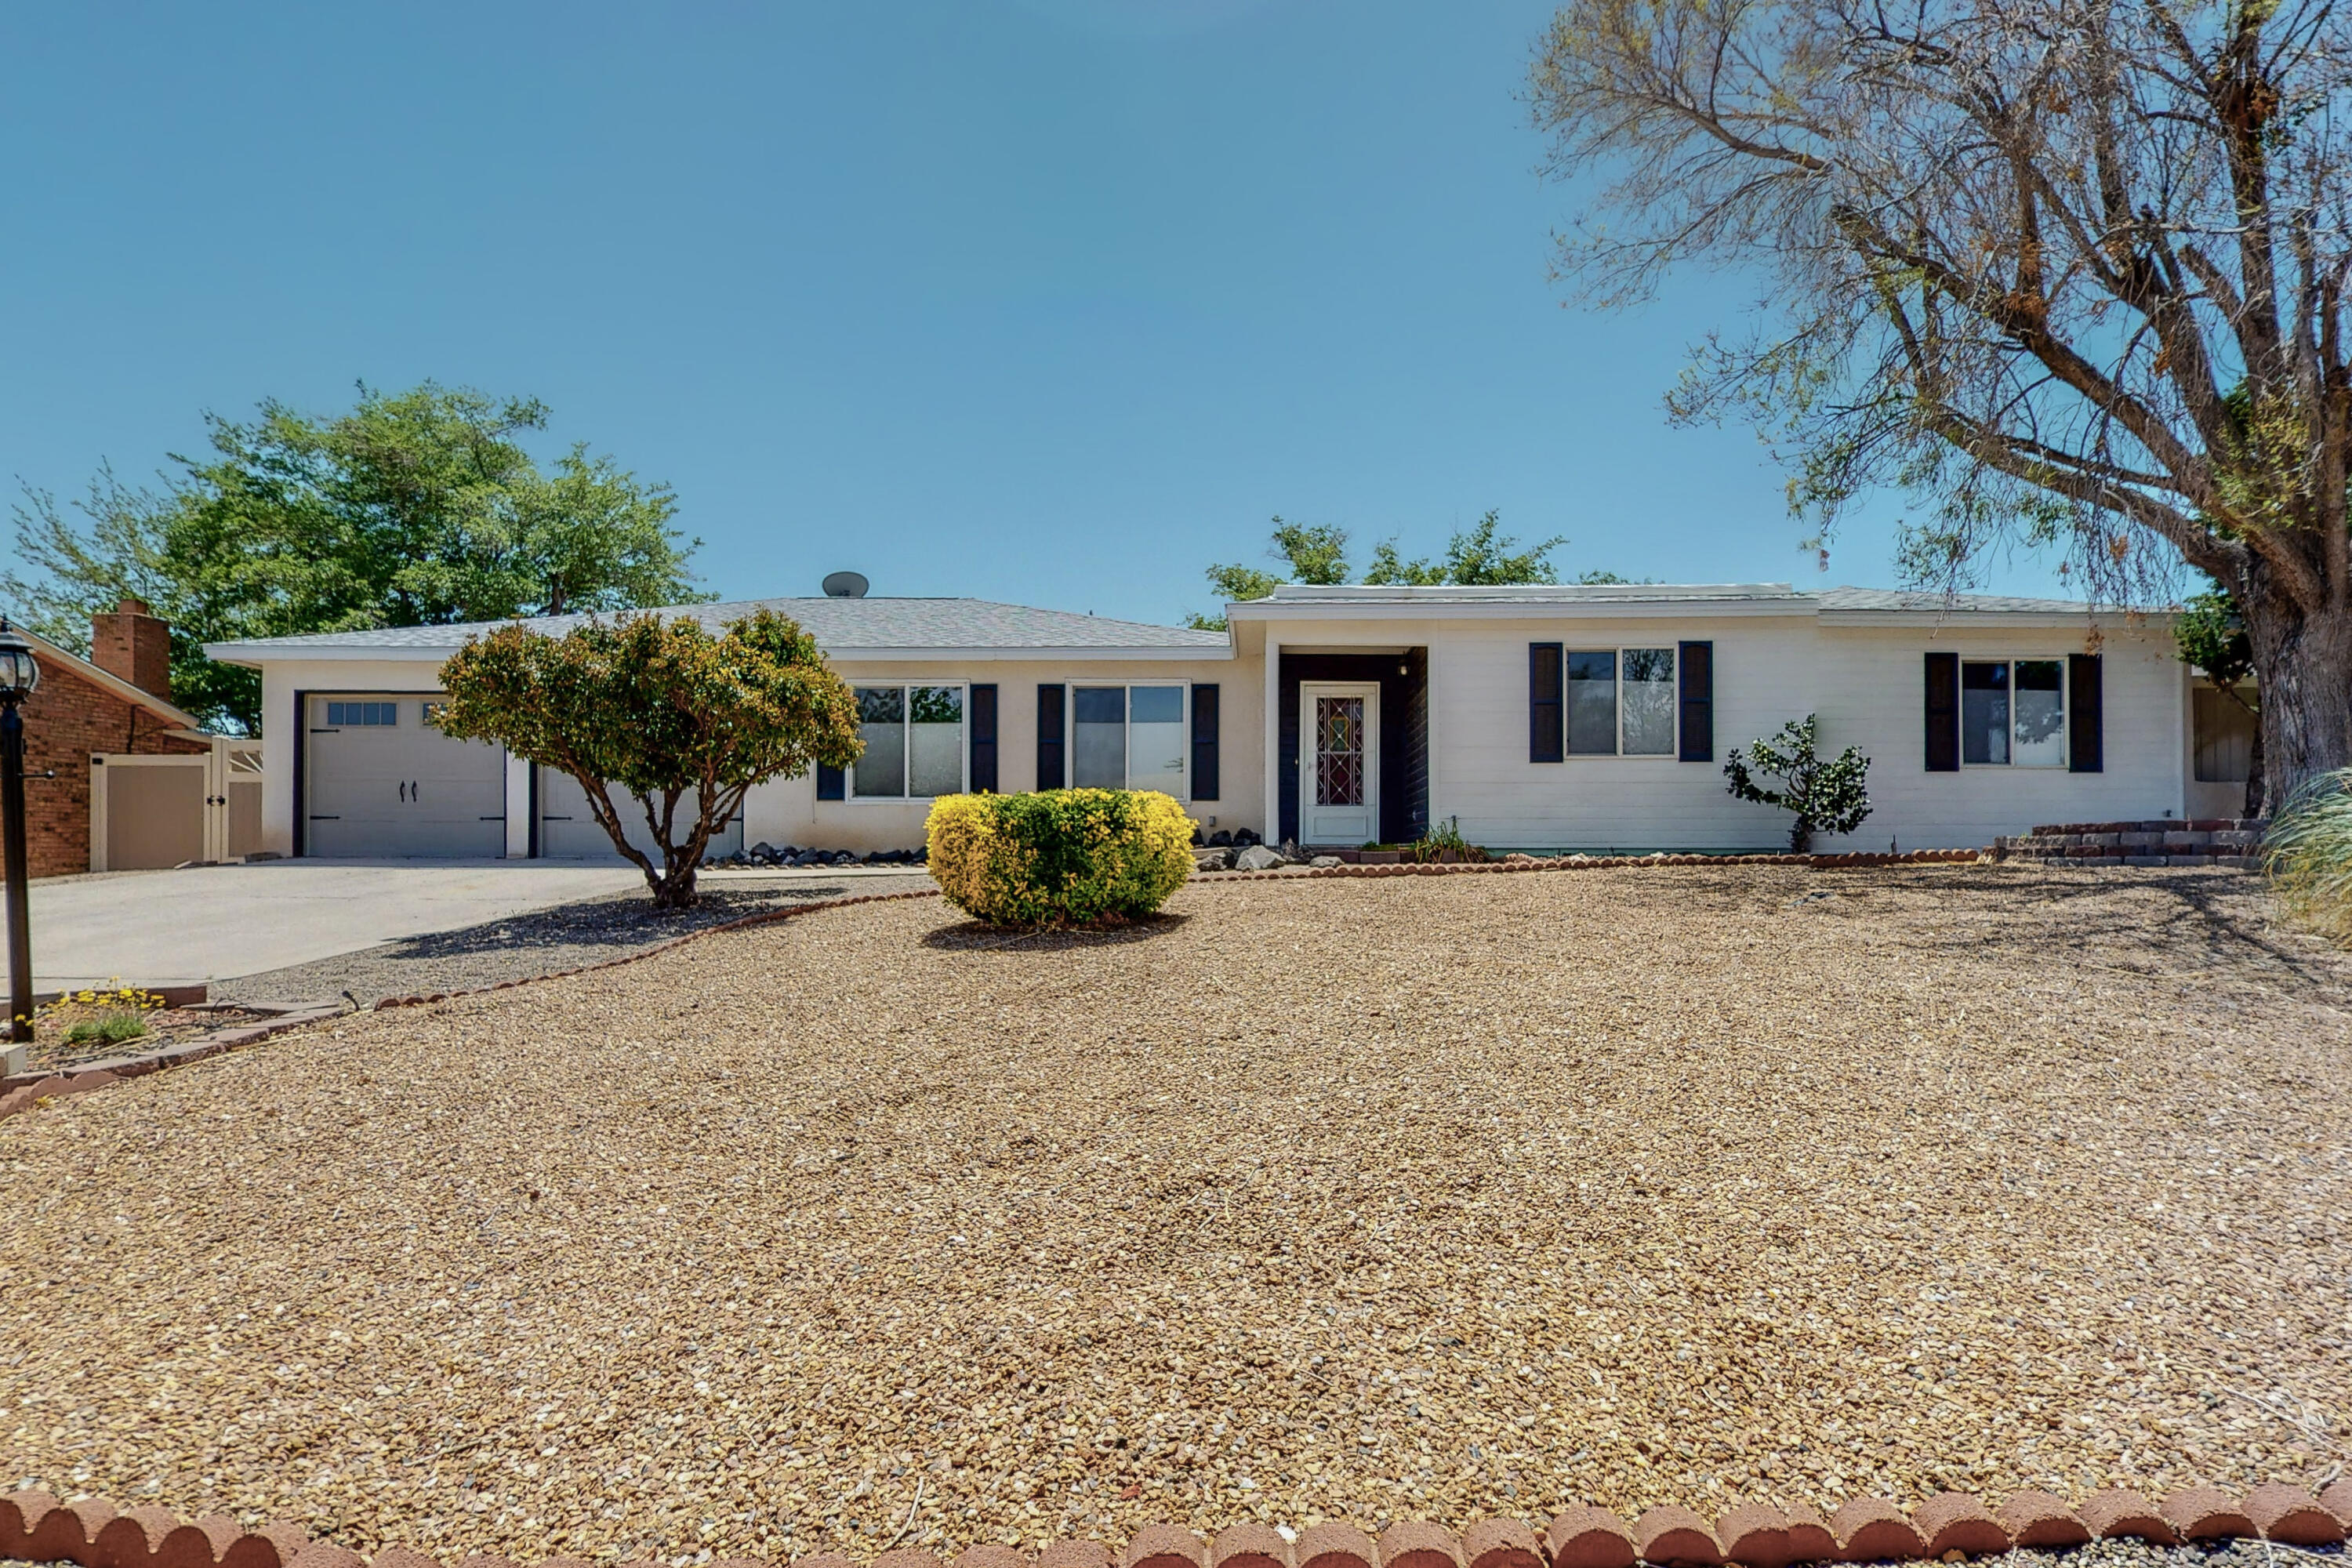 This home has been meticulously cared for and pride of ownership is evident! Located in the heart of Rio Rancho close to all amenities. Large .27 acre lot on a cul-de-sac. Fresh paint this May and REFRIGERATED AIR CONDITIONING! Roof is 3 years old, water heater 4 years old*Beautiful REMODELED KITCHEN with contemporary white cabinets and stainless appliances* exterior of refrigerator matches cabinets*glass accents*terrific oversize laundry room with a convenient 1/2 bath* 2 extra large living areas and/or formal dining.*Pellet stove for cold winter nights*HUGE BACKYARD has VINYL FENCING for no maintenance* mature landscape*storage shed*green house*water feature*front yard is easy care* If you want room without HOA or PID this is your place to call HOME!